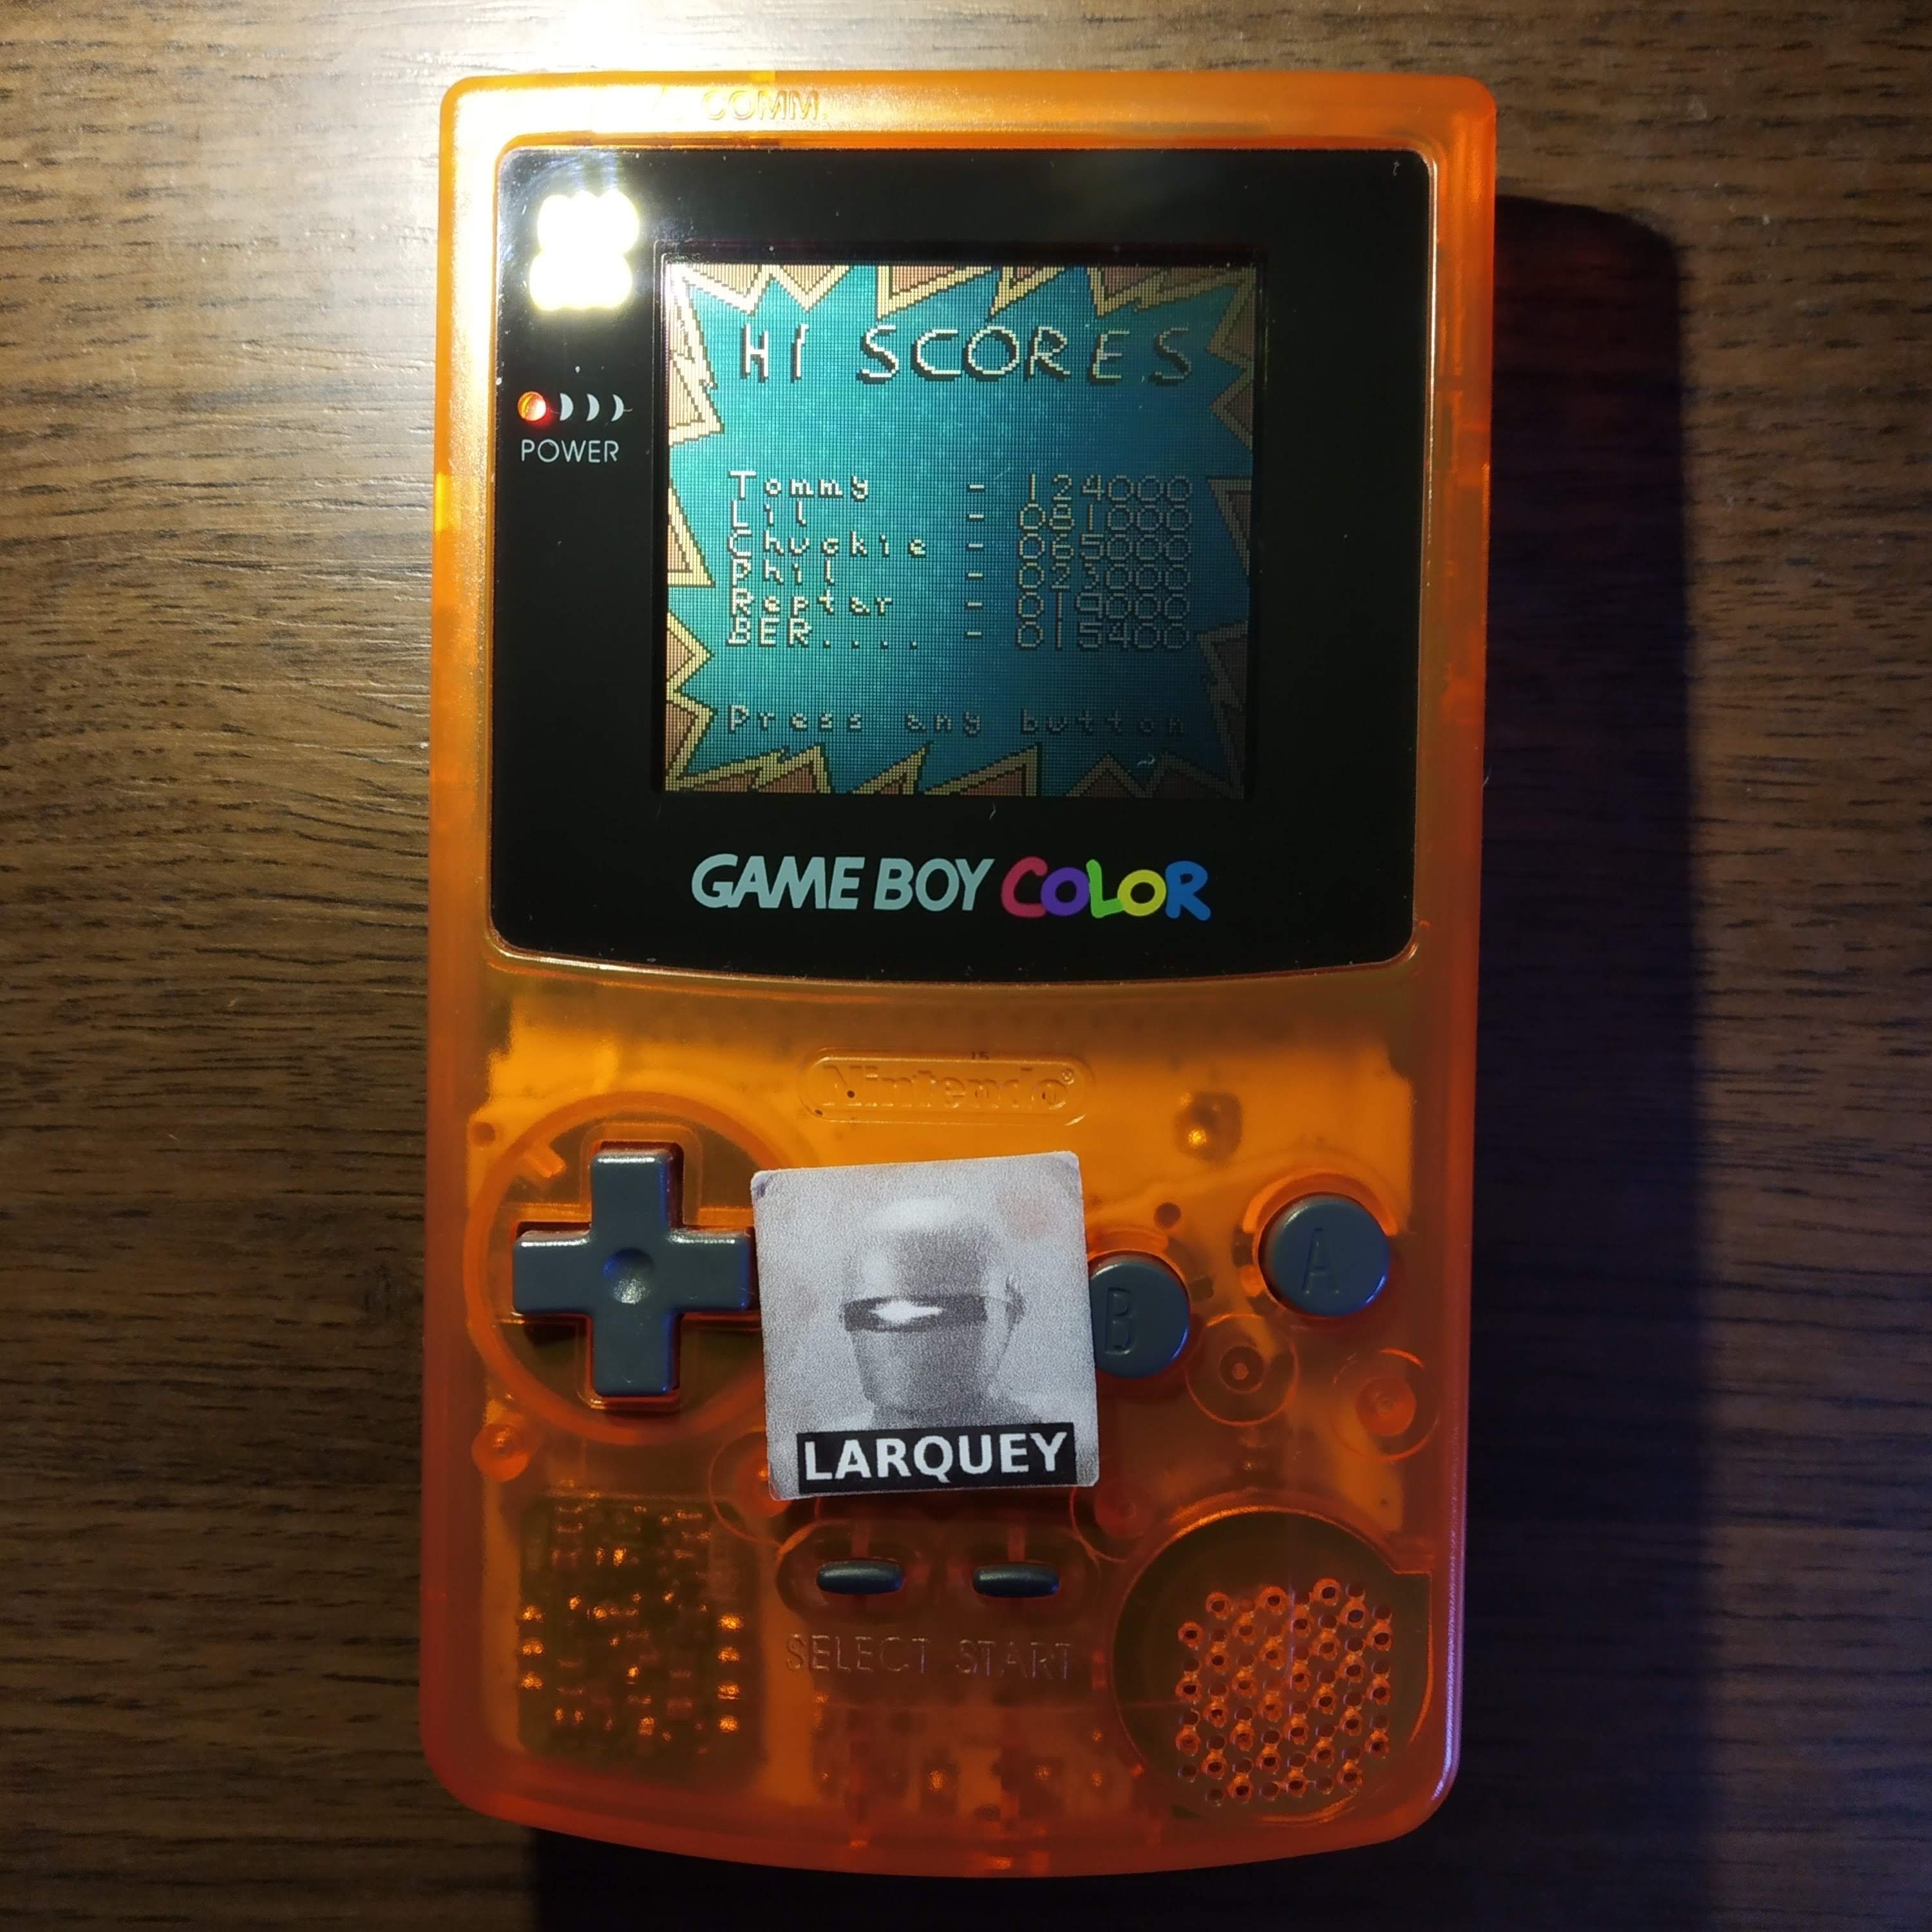 Larquey: Rugrats: Time Travelers (Game Boy Color) 15,400 points on 2020-07-24 04:36:20